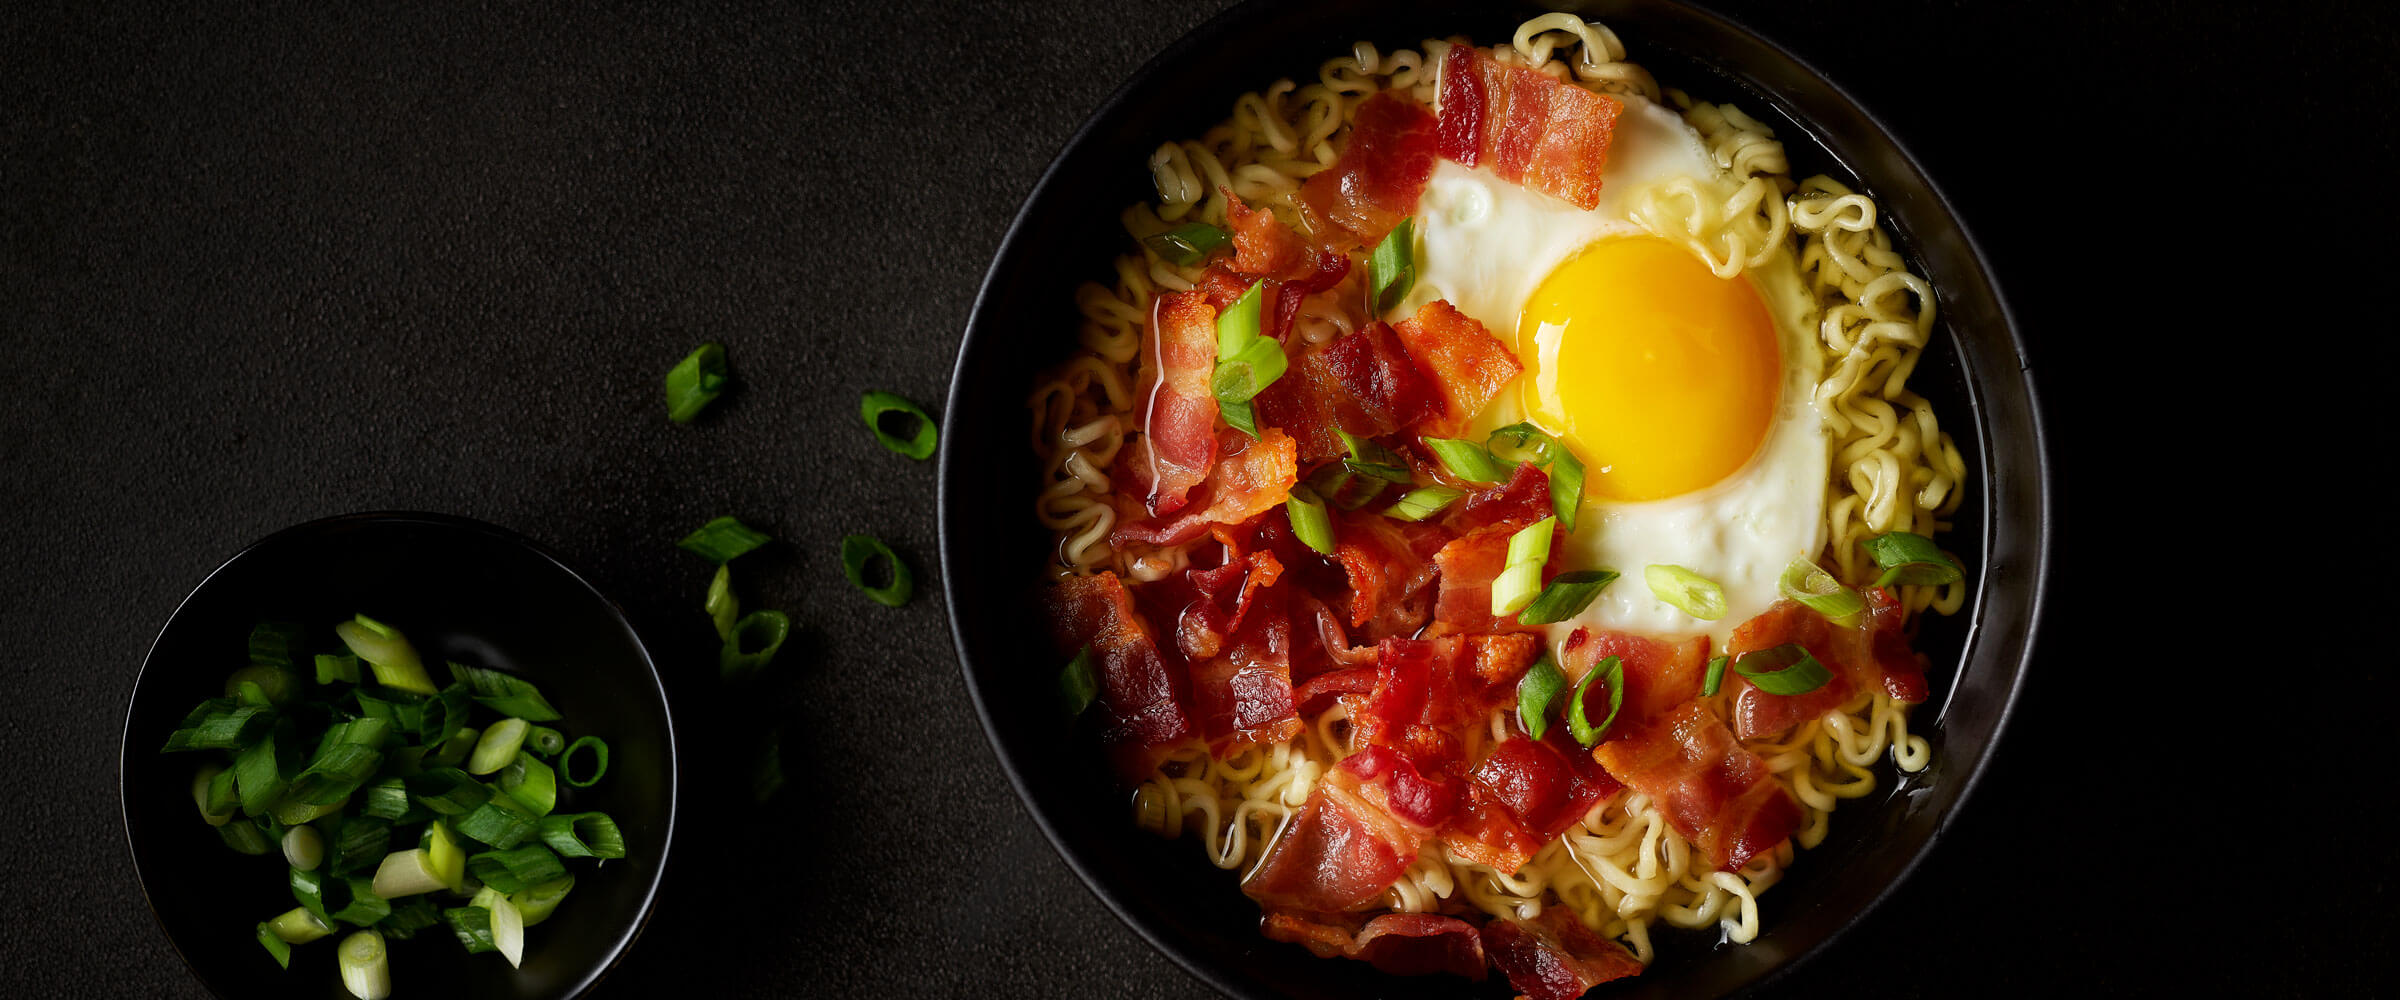 Bacon and Egg Ramen in black bowl topped with green onions